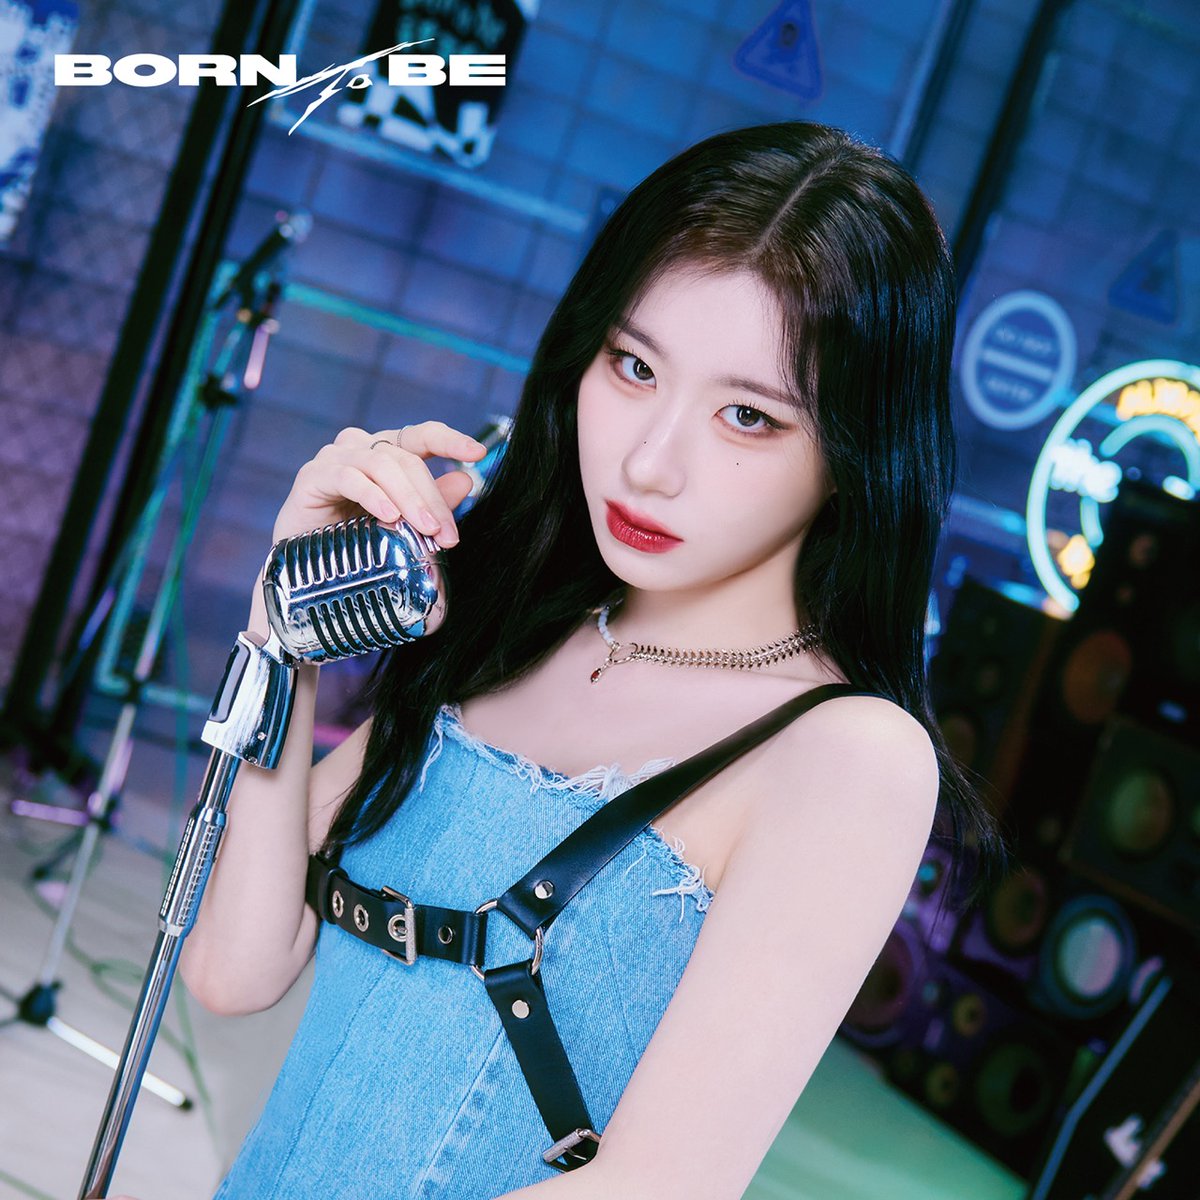 ITZY 2ND WORLD TOUR ＜BORN TO BE＞ in JAPAN

D-2

#ITZY #BORN_TO_BE #MIDZY
#ITZY_2ND_WORLD_TOUR